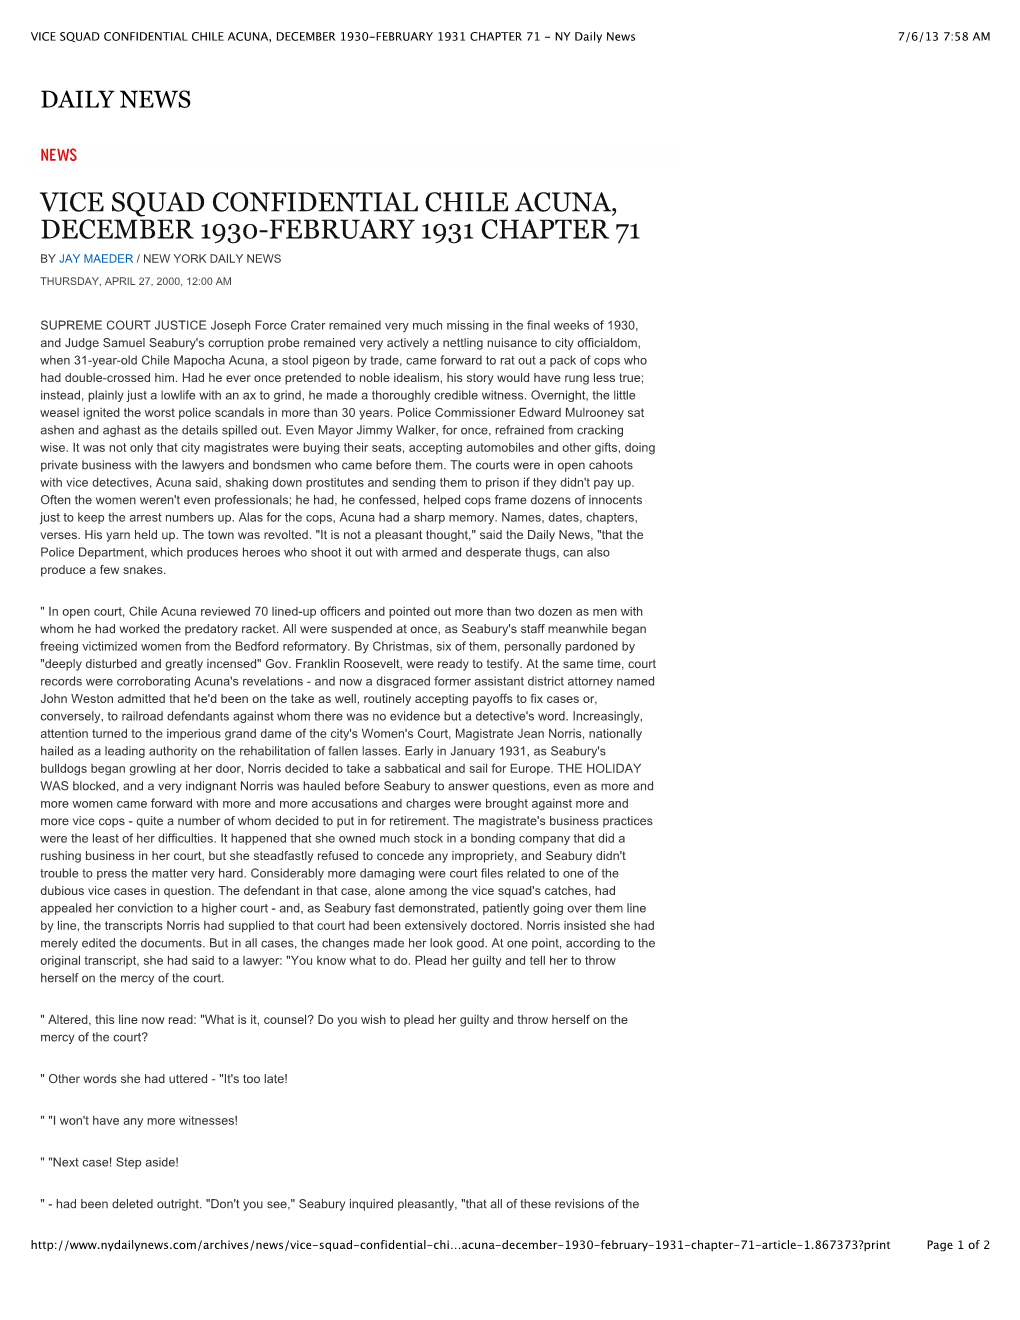 VICE SQUAD CONFIDENTIAL CHILE ACUNA, DECEMBER 1930-FEBRUARY 1931 CHAPTER 71 - NY Daily News 7/6/13 7:58 AM